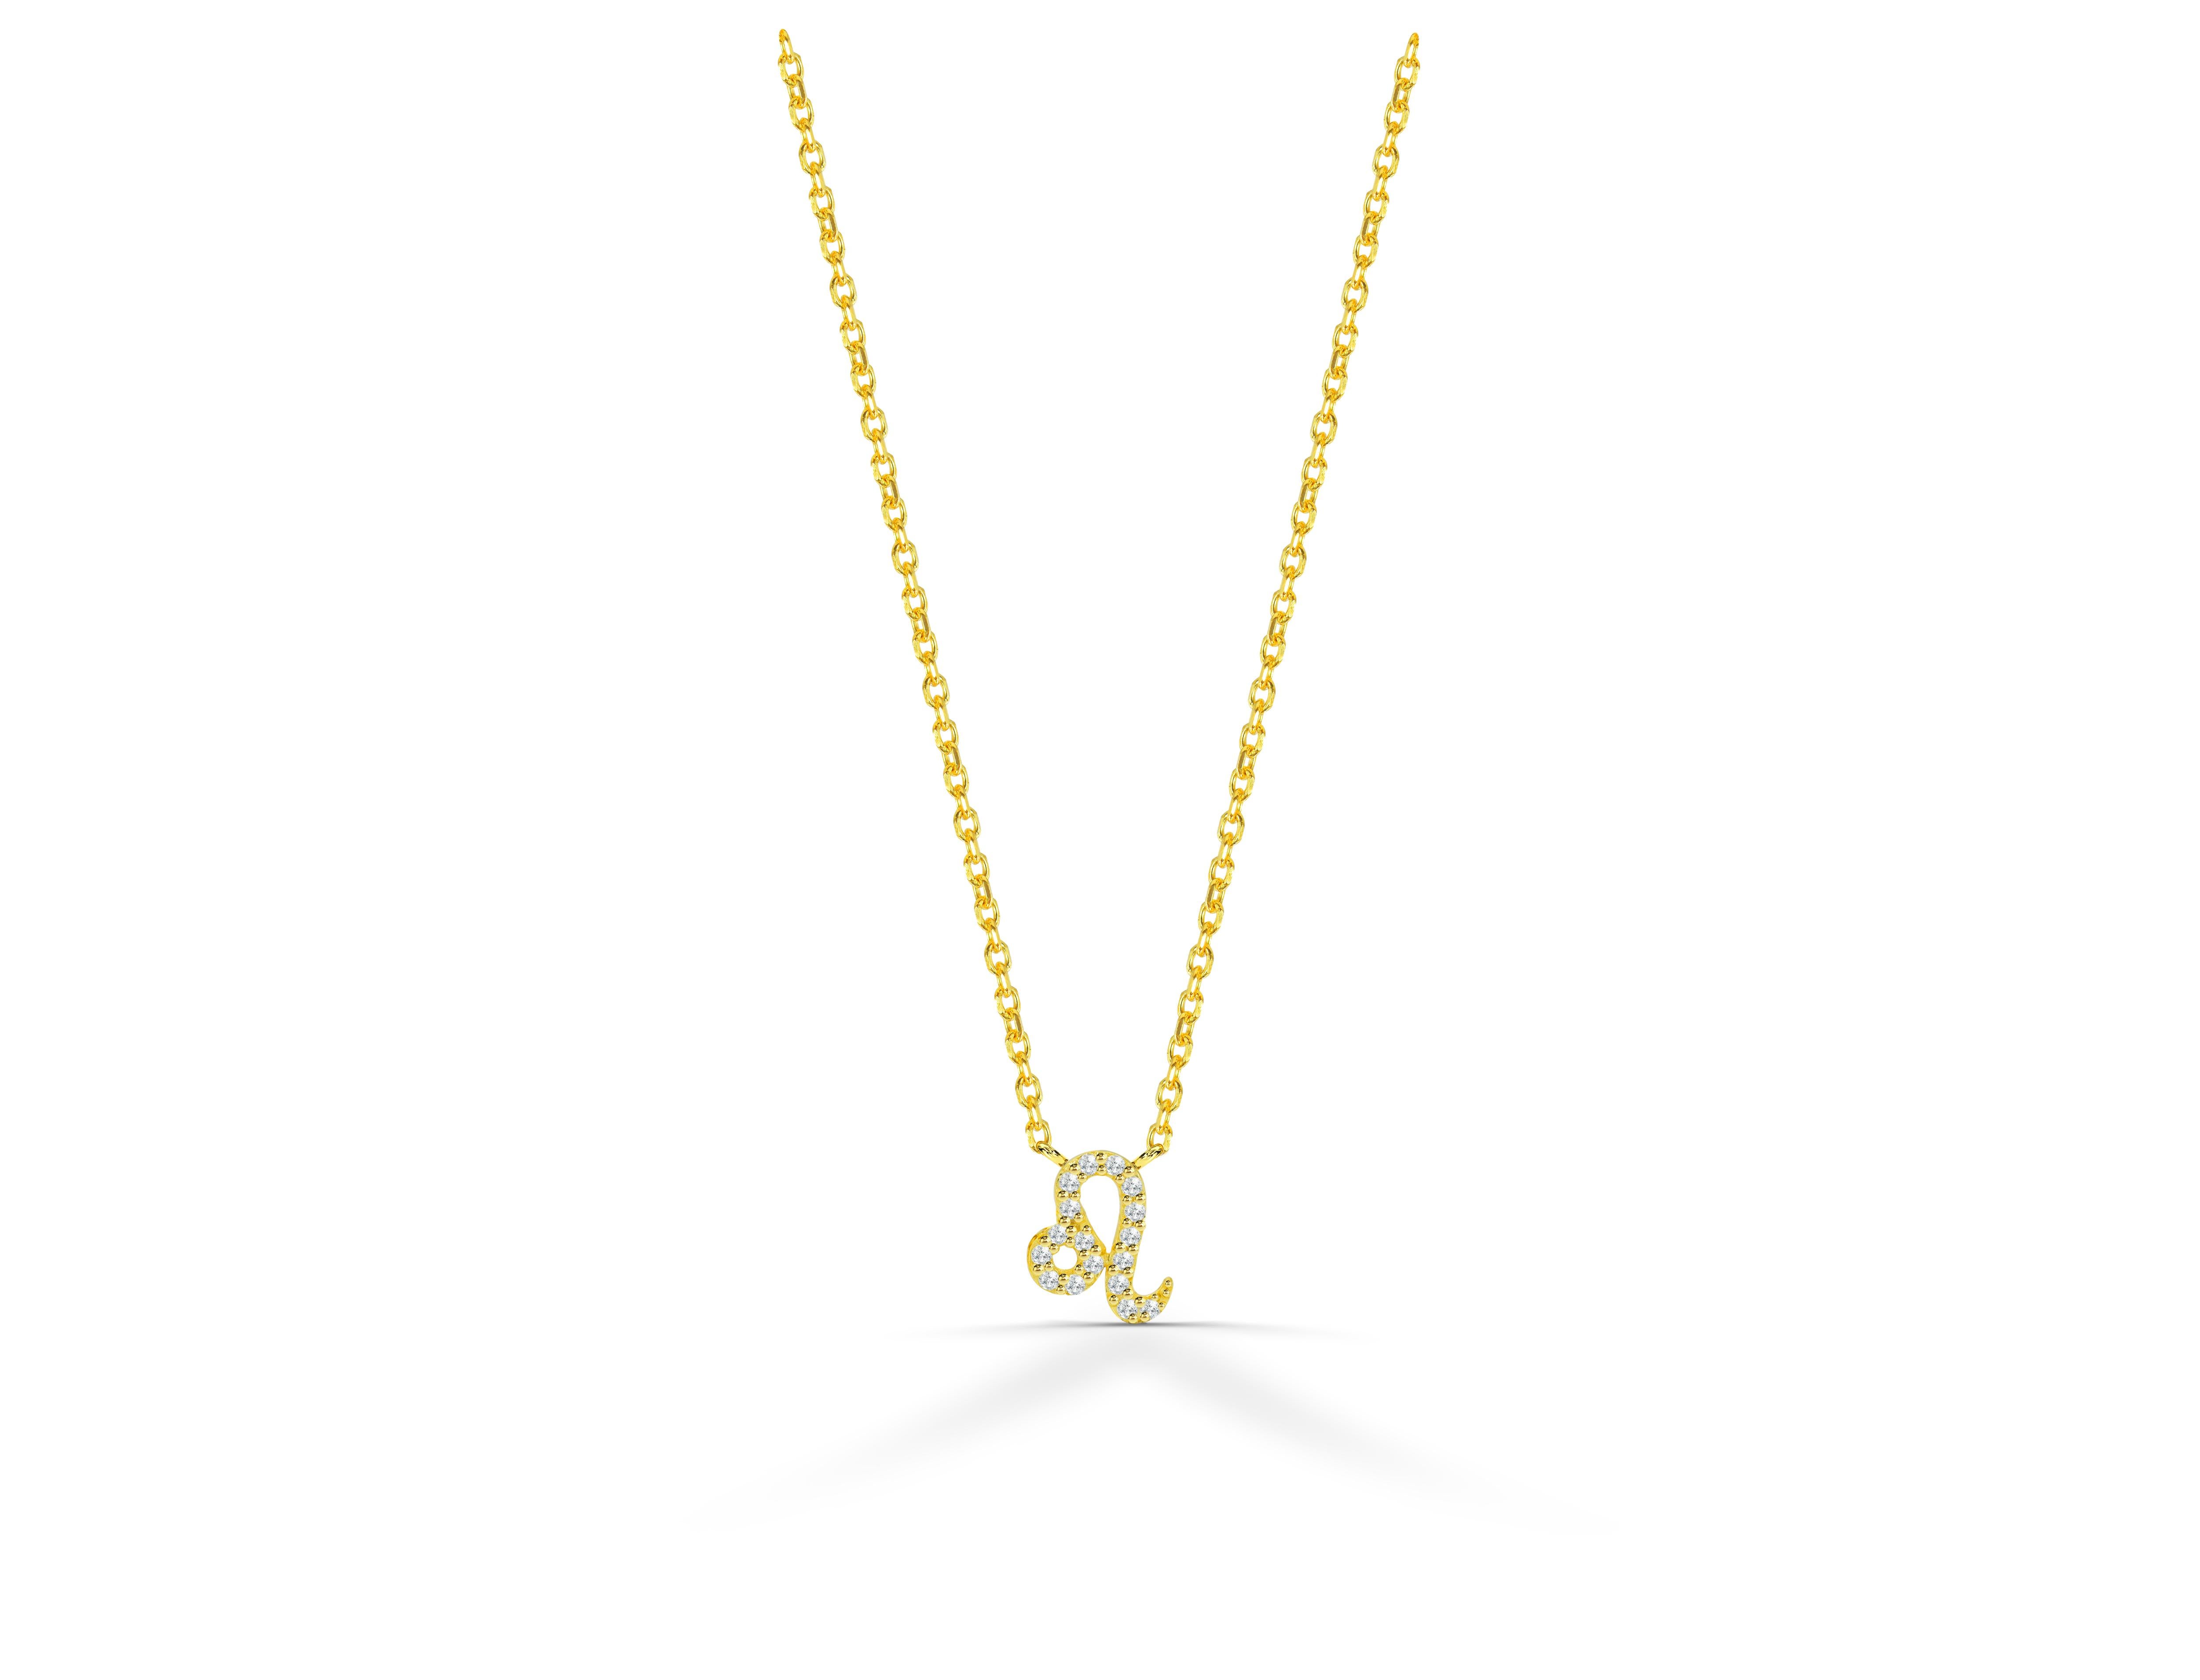 Beautiful and Sparkly Diamond Leo Necklace is made of 18k solid gold available in three colors of gold, White Gold / Rose Gold / Yellow Gold.

Natural genuine round cut diamond each diamond is hand selected by me to ensure quality and set by a